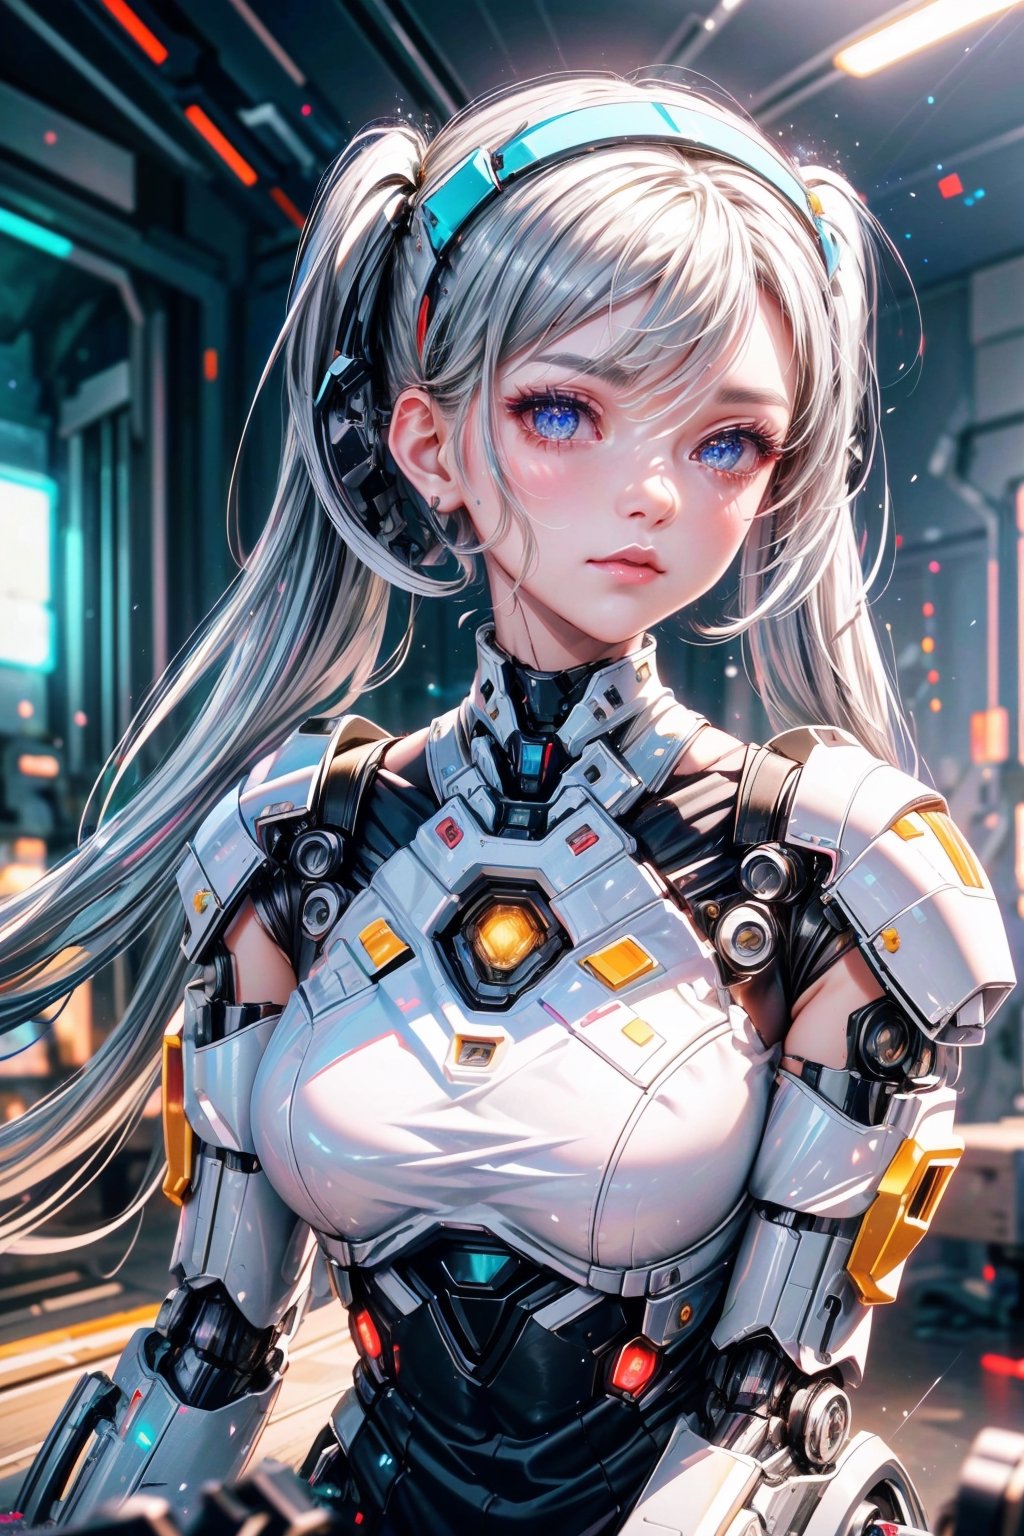 ((high resolution)), ((UHD)), ((incredibly absurdres)), break. ((One android girl)), break. ((sliver twintail hair:1.5)), ((upper body:1.5)), ((looking at camera:1.2)), break. ((in the cyberstyle city)), ((slender boby)), ((intricate internal structure)), ((brighten parts:1.5)), break. ((extremely detailed mecha suit:1.2)), break. (robotic arms), (robotic legs), (robotic hands), ((robotic joint:1.3)), break. Cinematic angle, ultra fine quality, masterpiece, best quality, incredibly absurdres, fhighly detailed, sharp focus, (photon mapping, radiosity, physically-based rendering, automatic white balance), masterpiece, best quality, Mecha body, furure_urban, incredibly absurdres